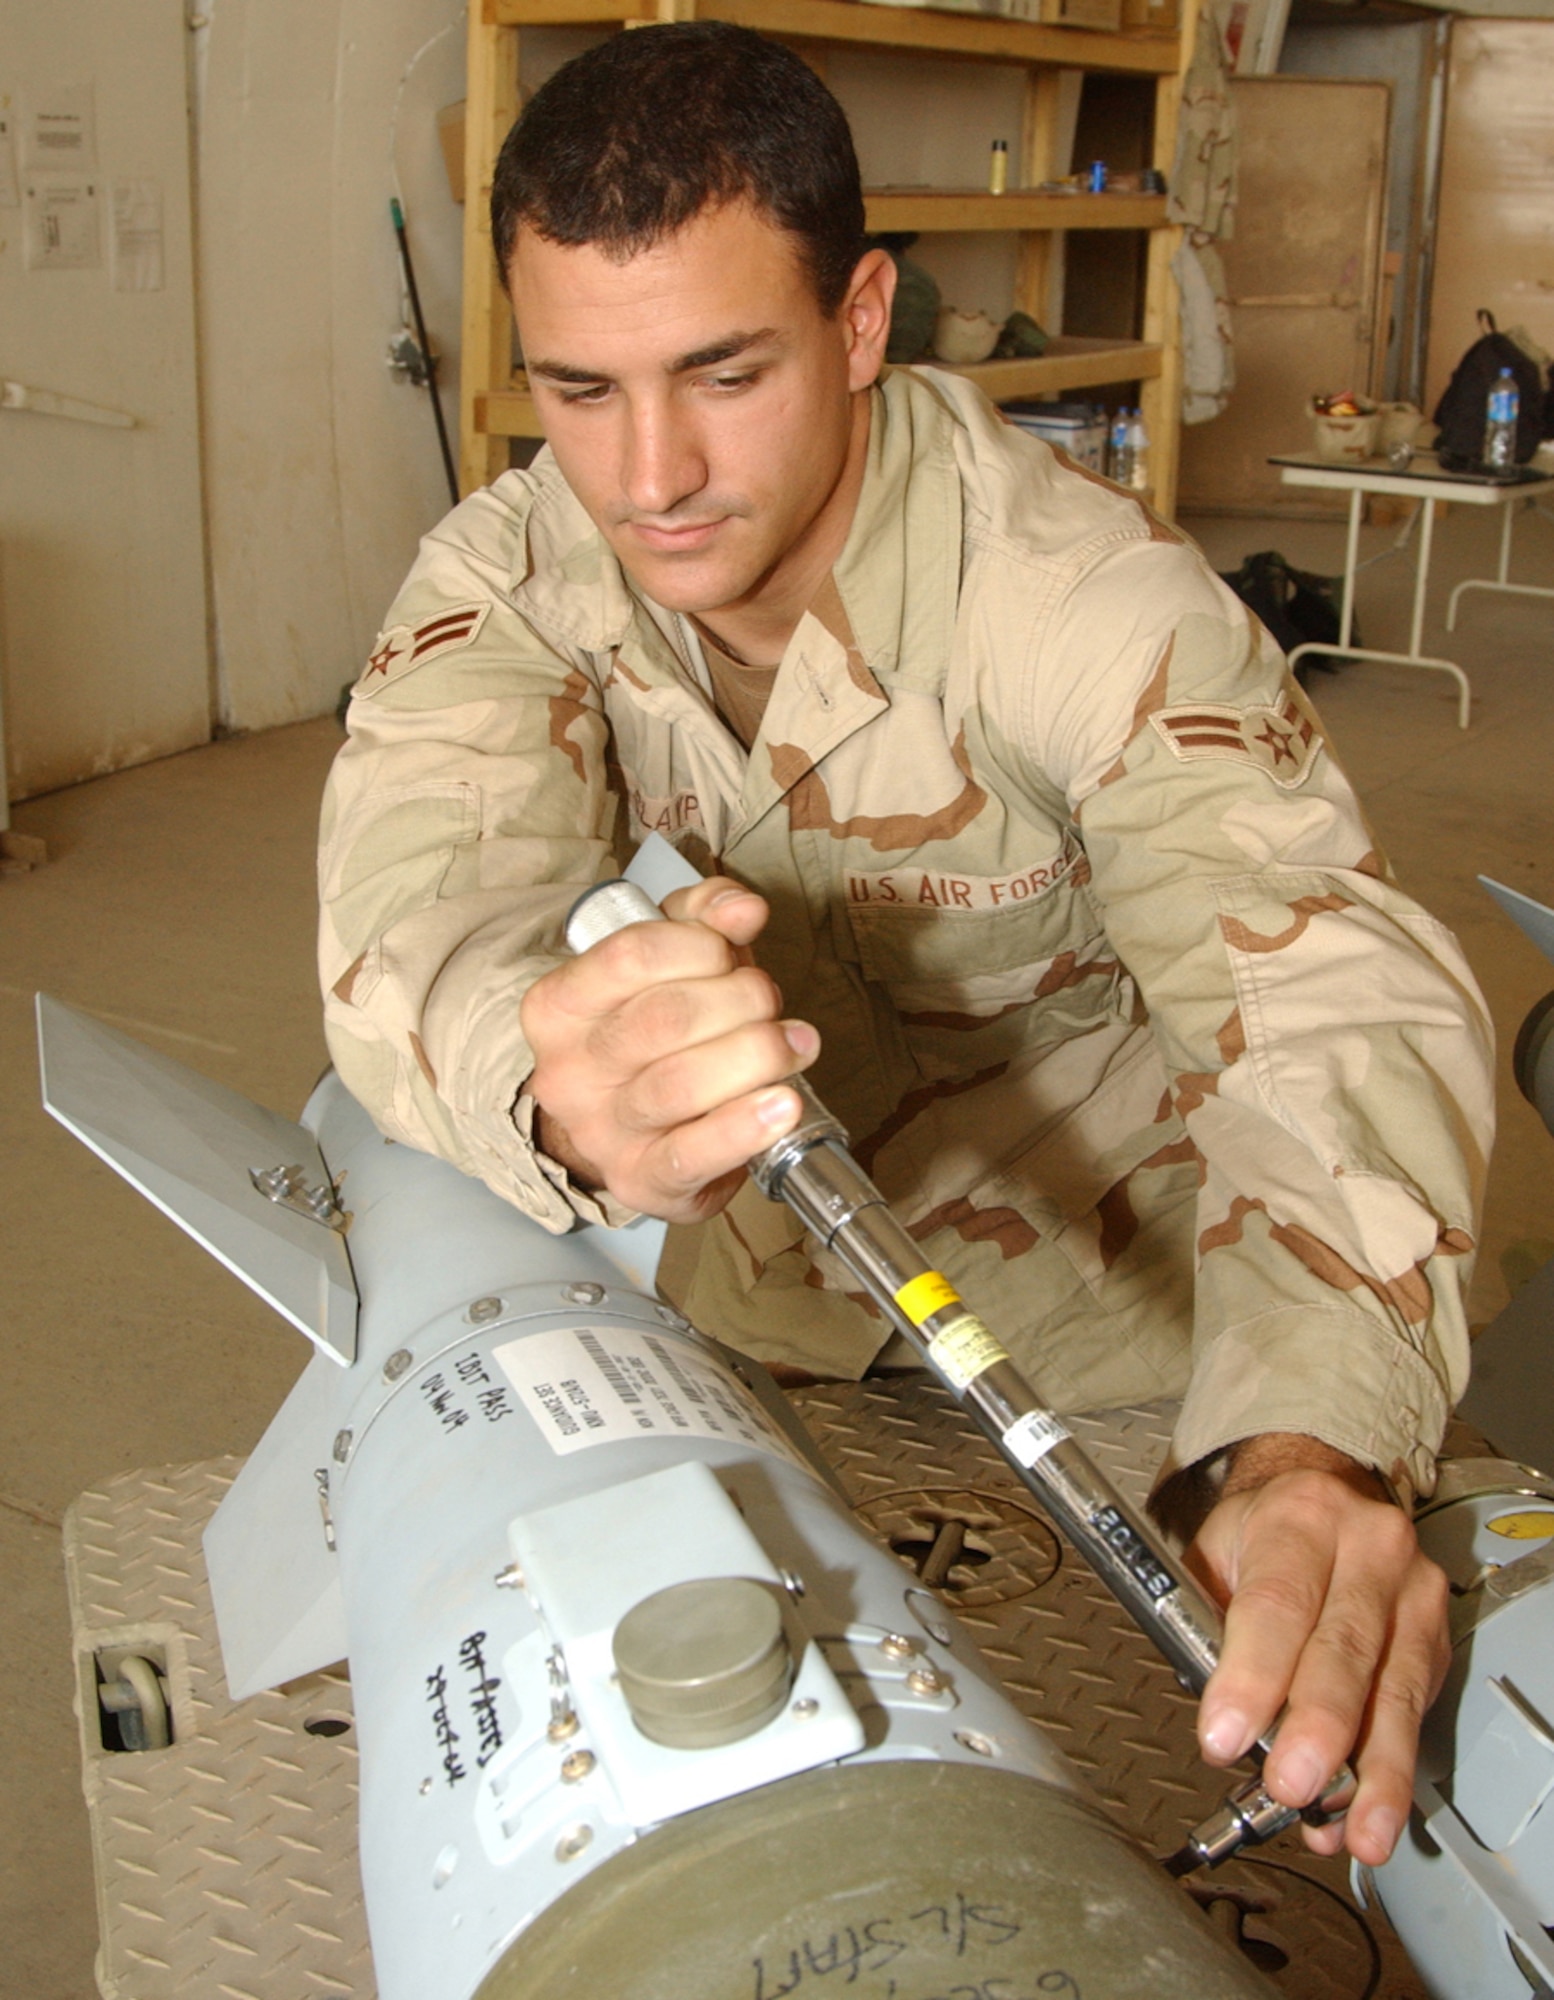 Airman 1st Class Michael Claypoole, a munitions systems journeyman with the 332nd Expeditionary Maintenance Squadron, torques down the tail fin assembly of a 500-pound Joint Direct Attack Munition after it was delivered to Balad Air Base in 2004. (Air Force photo by Master Sgt. David Reagan)